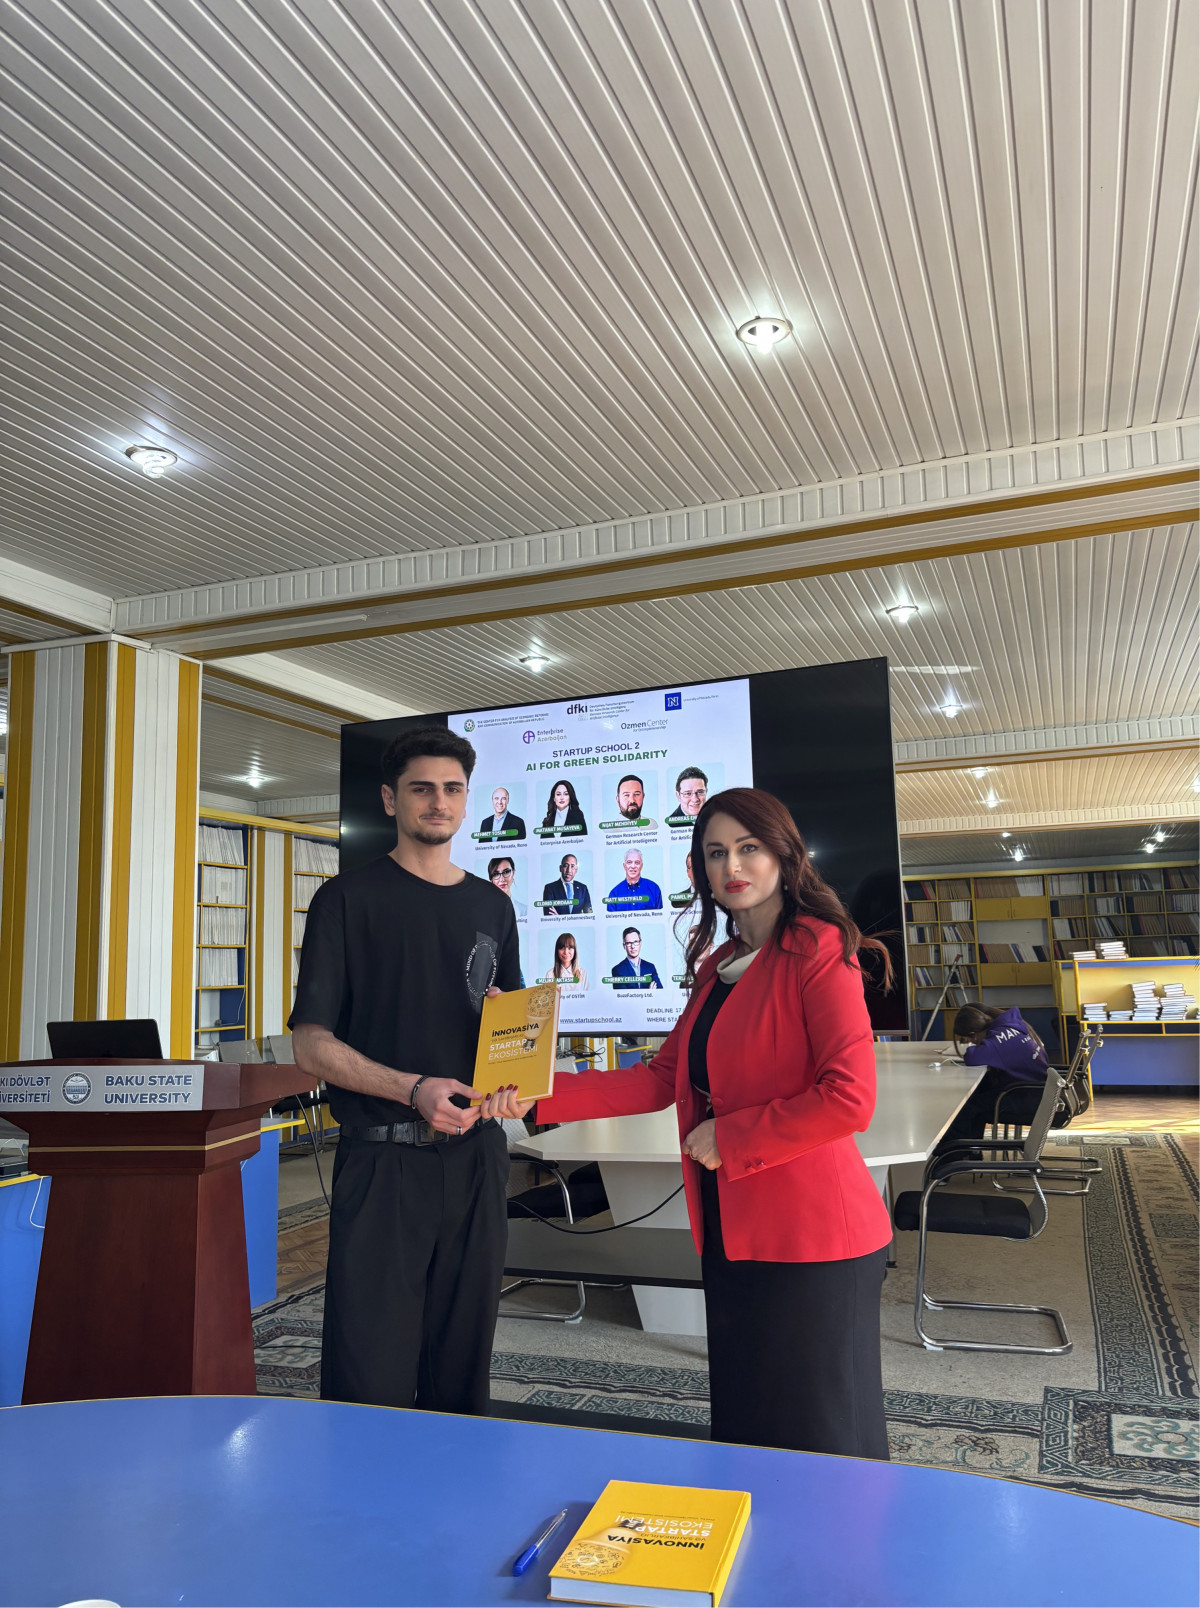 "StartUp School 2 - AI for Green Solidarity" project was presented at BSU